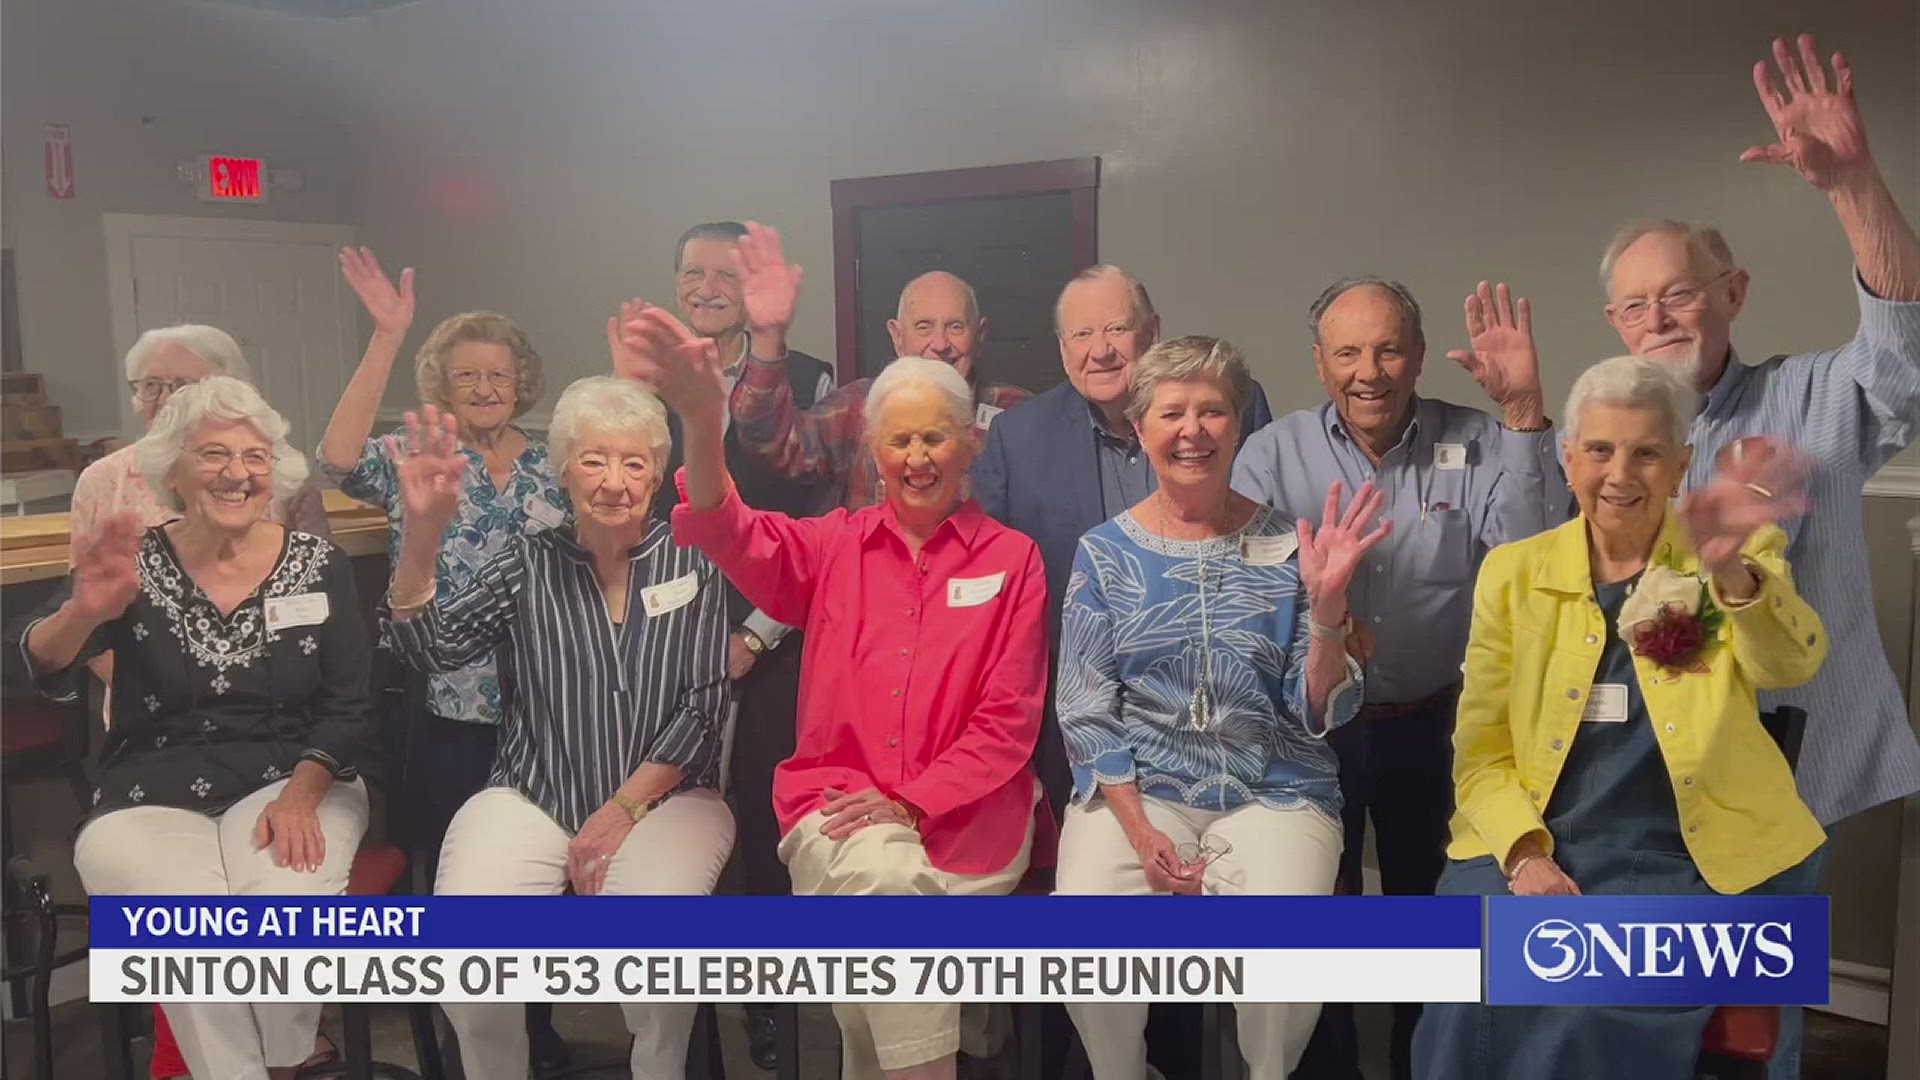 3NEWS got to catch up with the Sinton High School class of 1953.